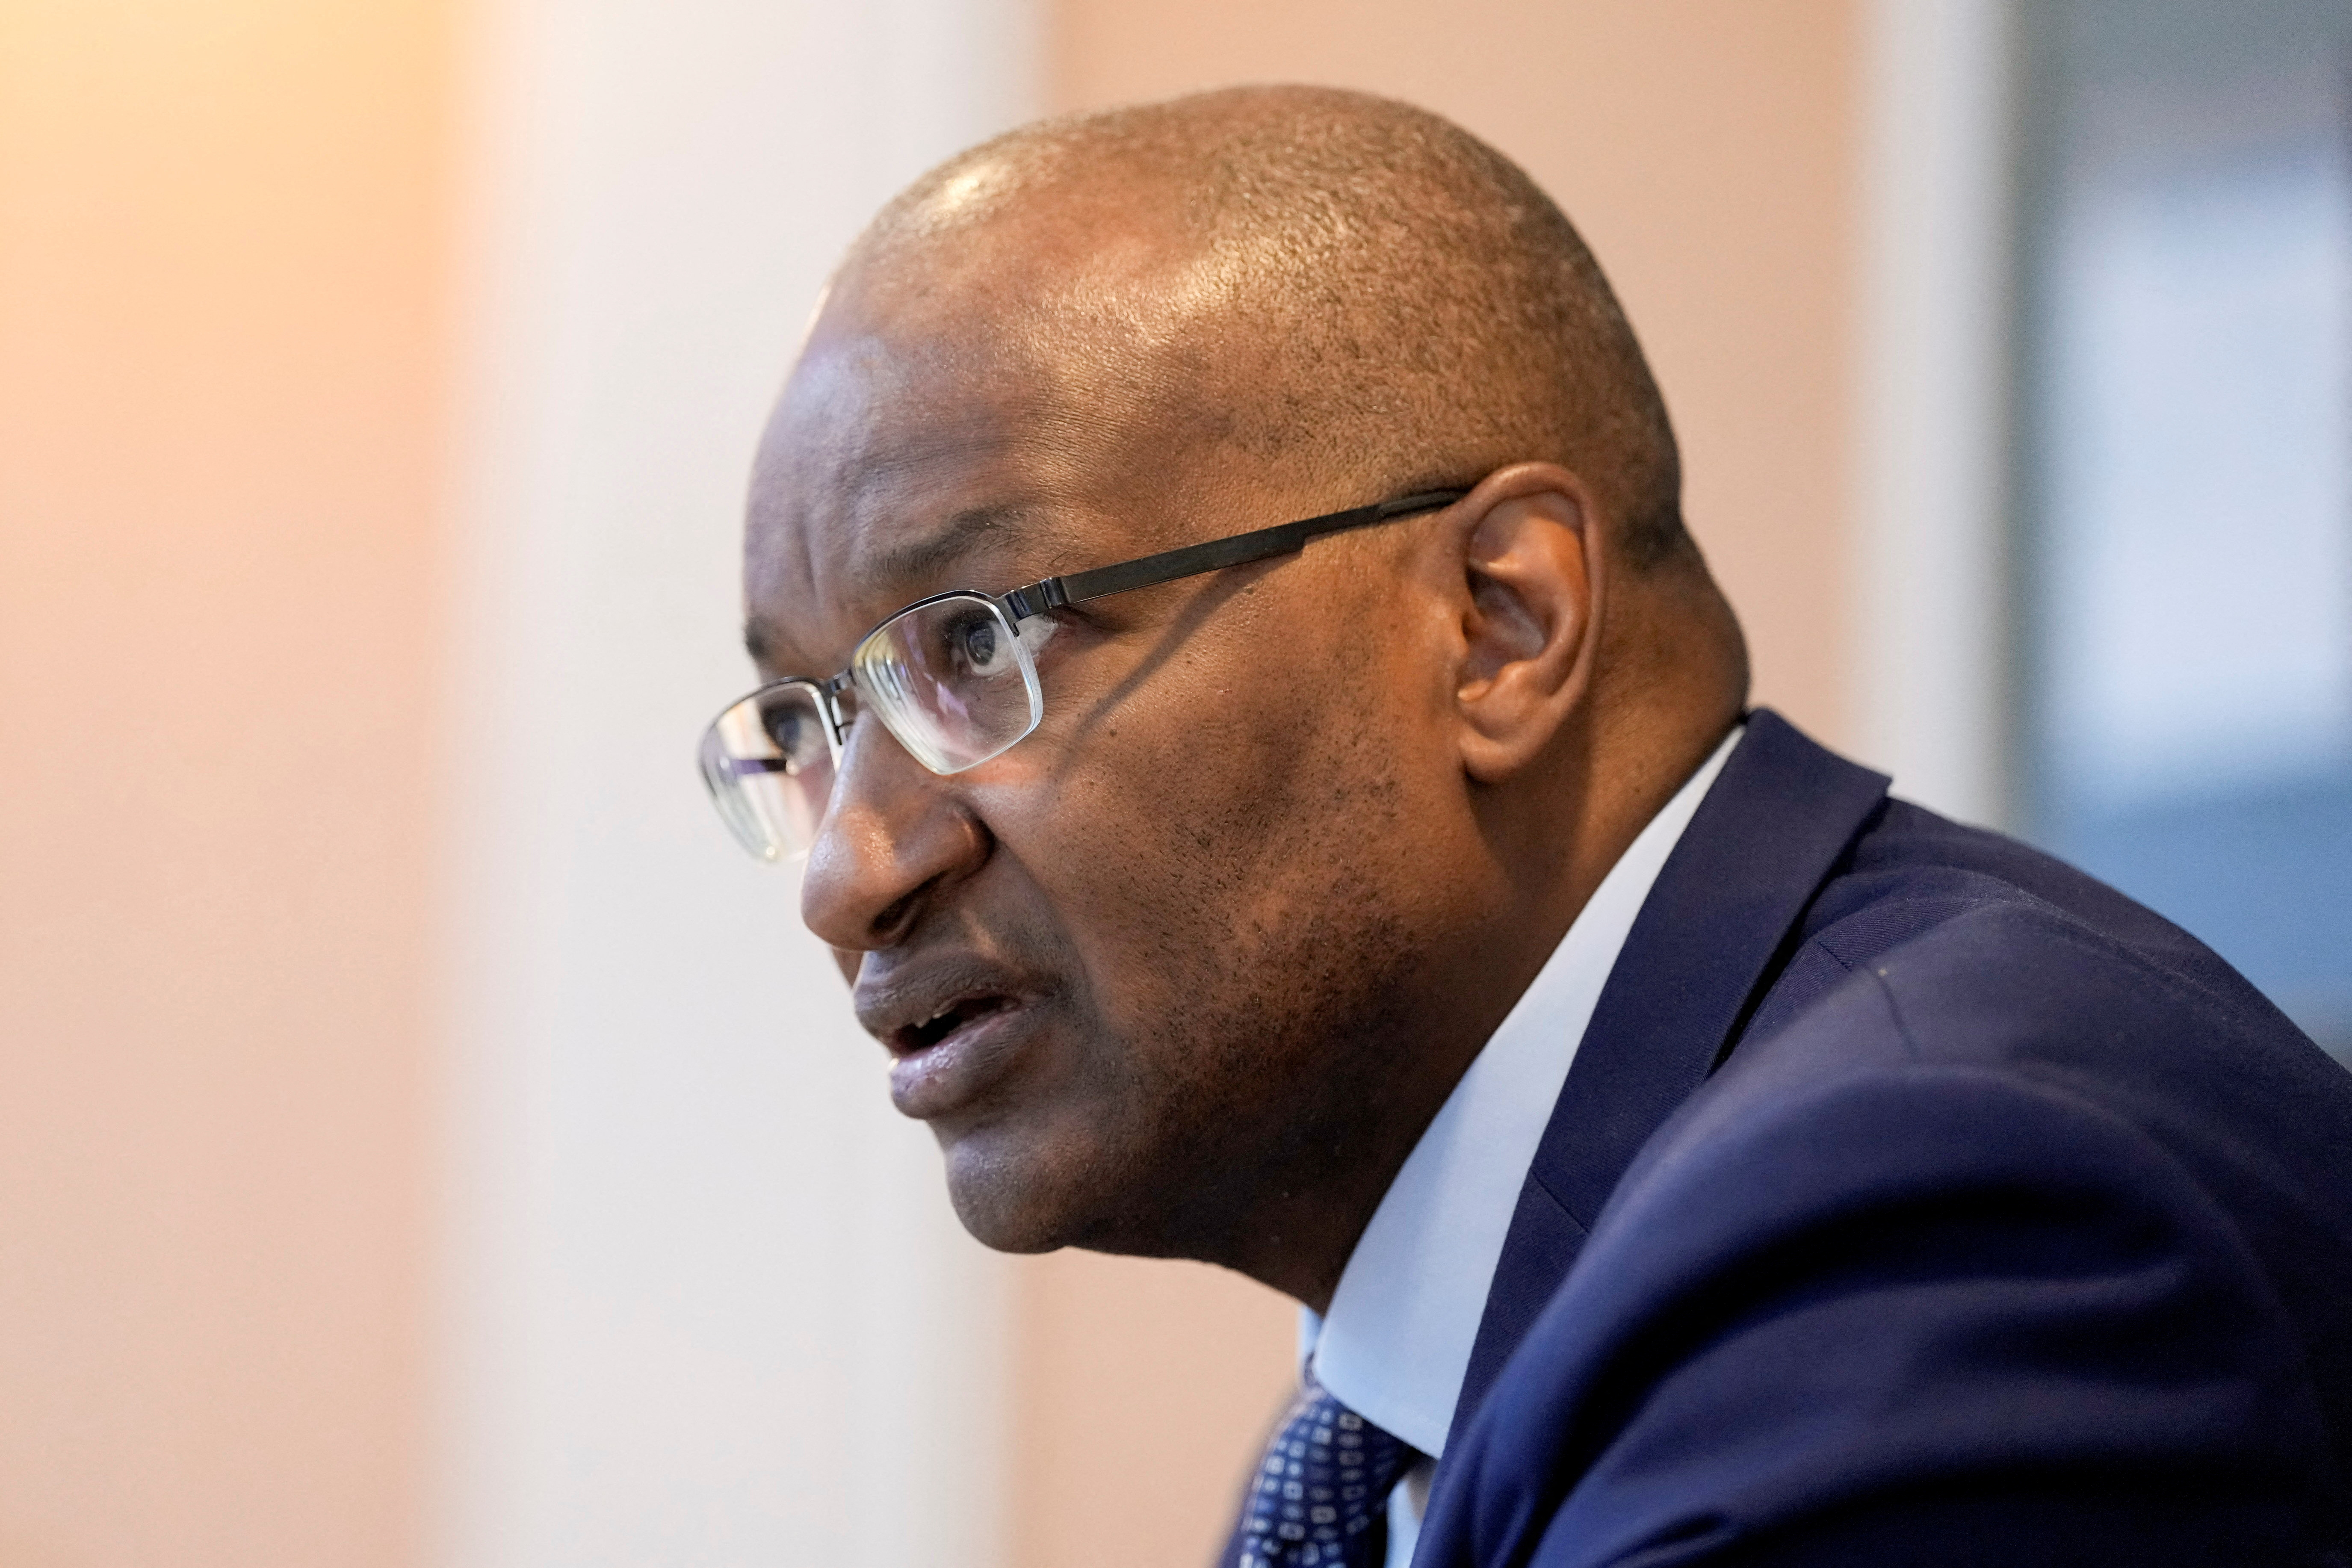 Governor of the Central Bank of Kenya Patrick Njoroge speaks during an interview with Reuters at the IMF Building, in Washington